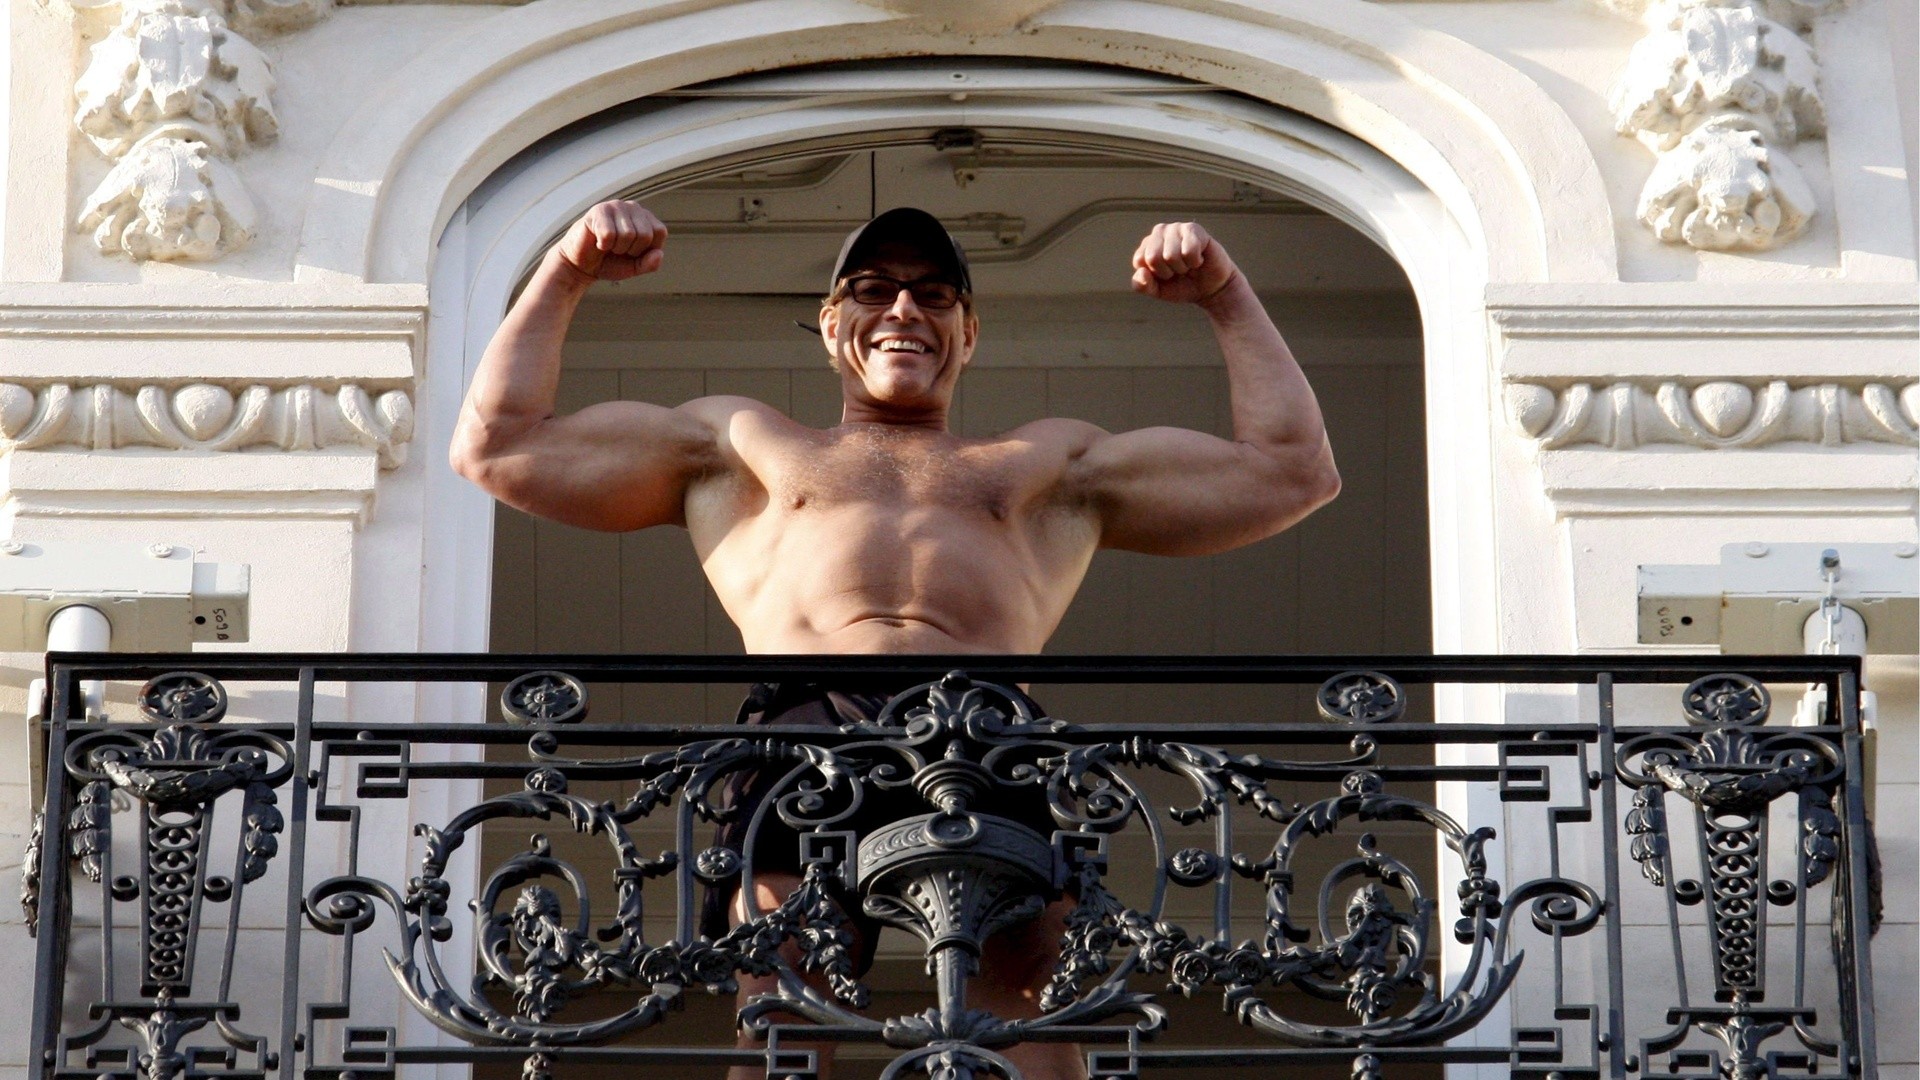 Men Actor Celebrity Shirtless Muscles Smiling Looking At Viewer Glasses Hat Architecture Balcony Sho 1920x1080